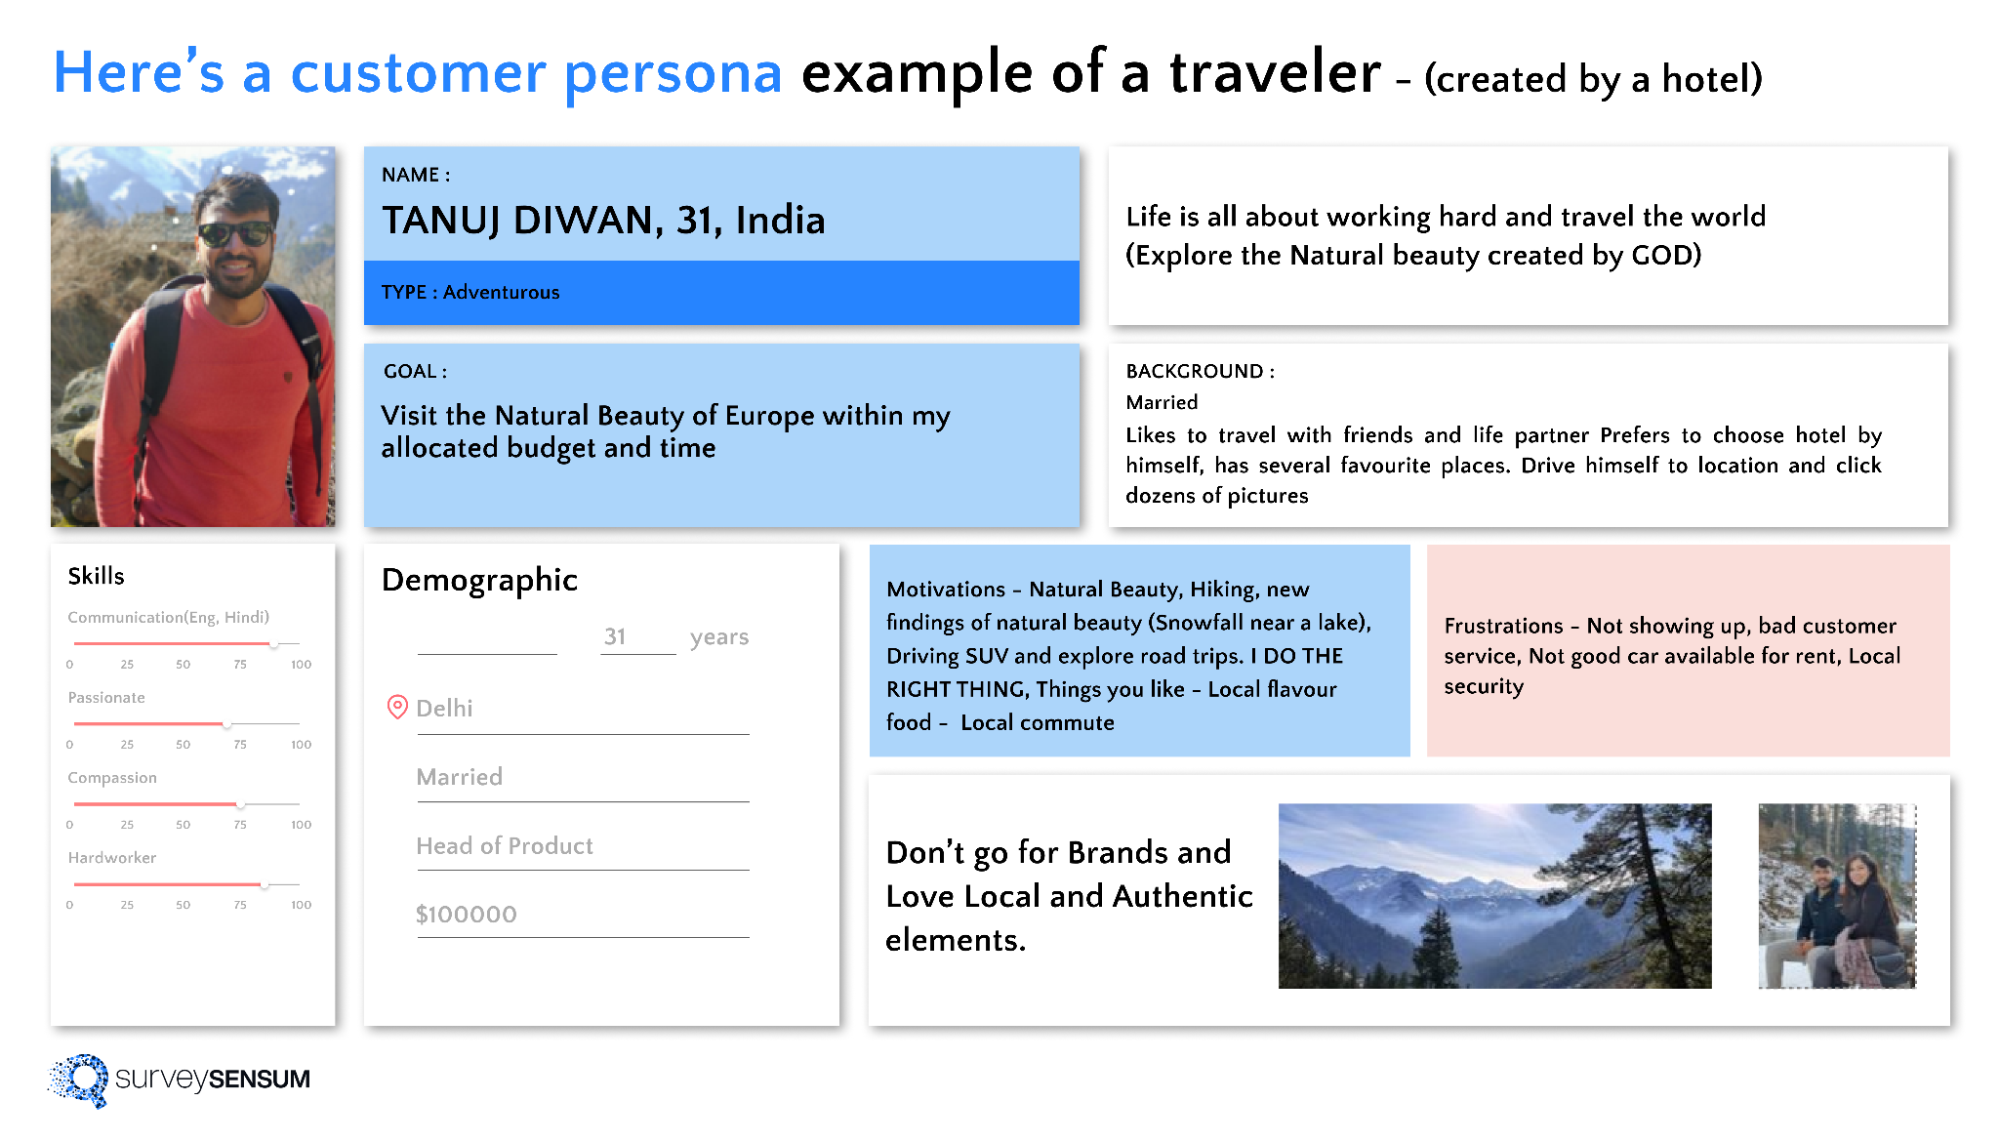 This is the image of the customer persona for a traveling website.